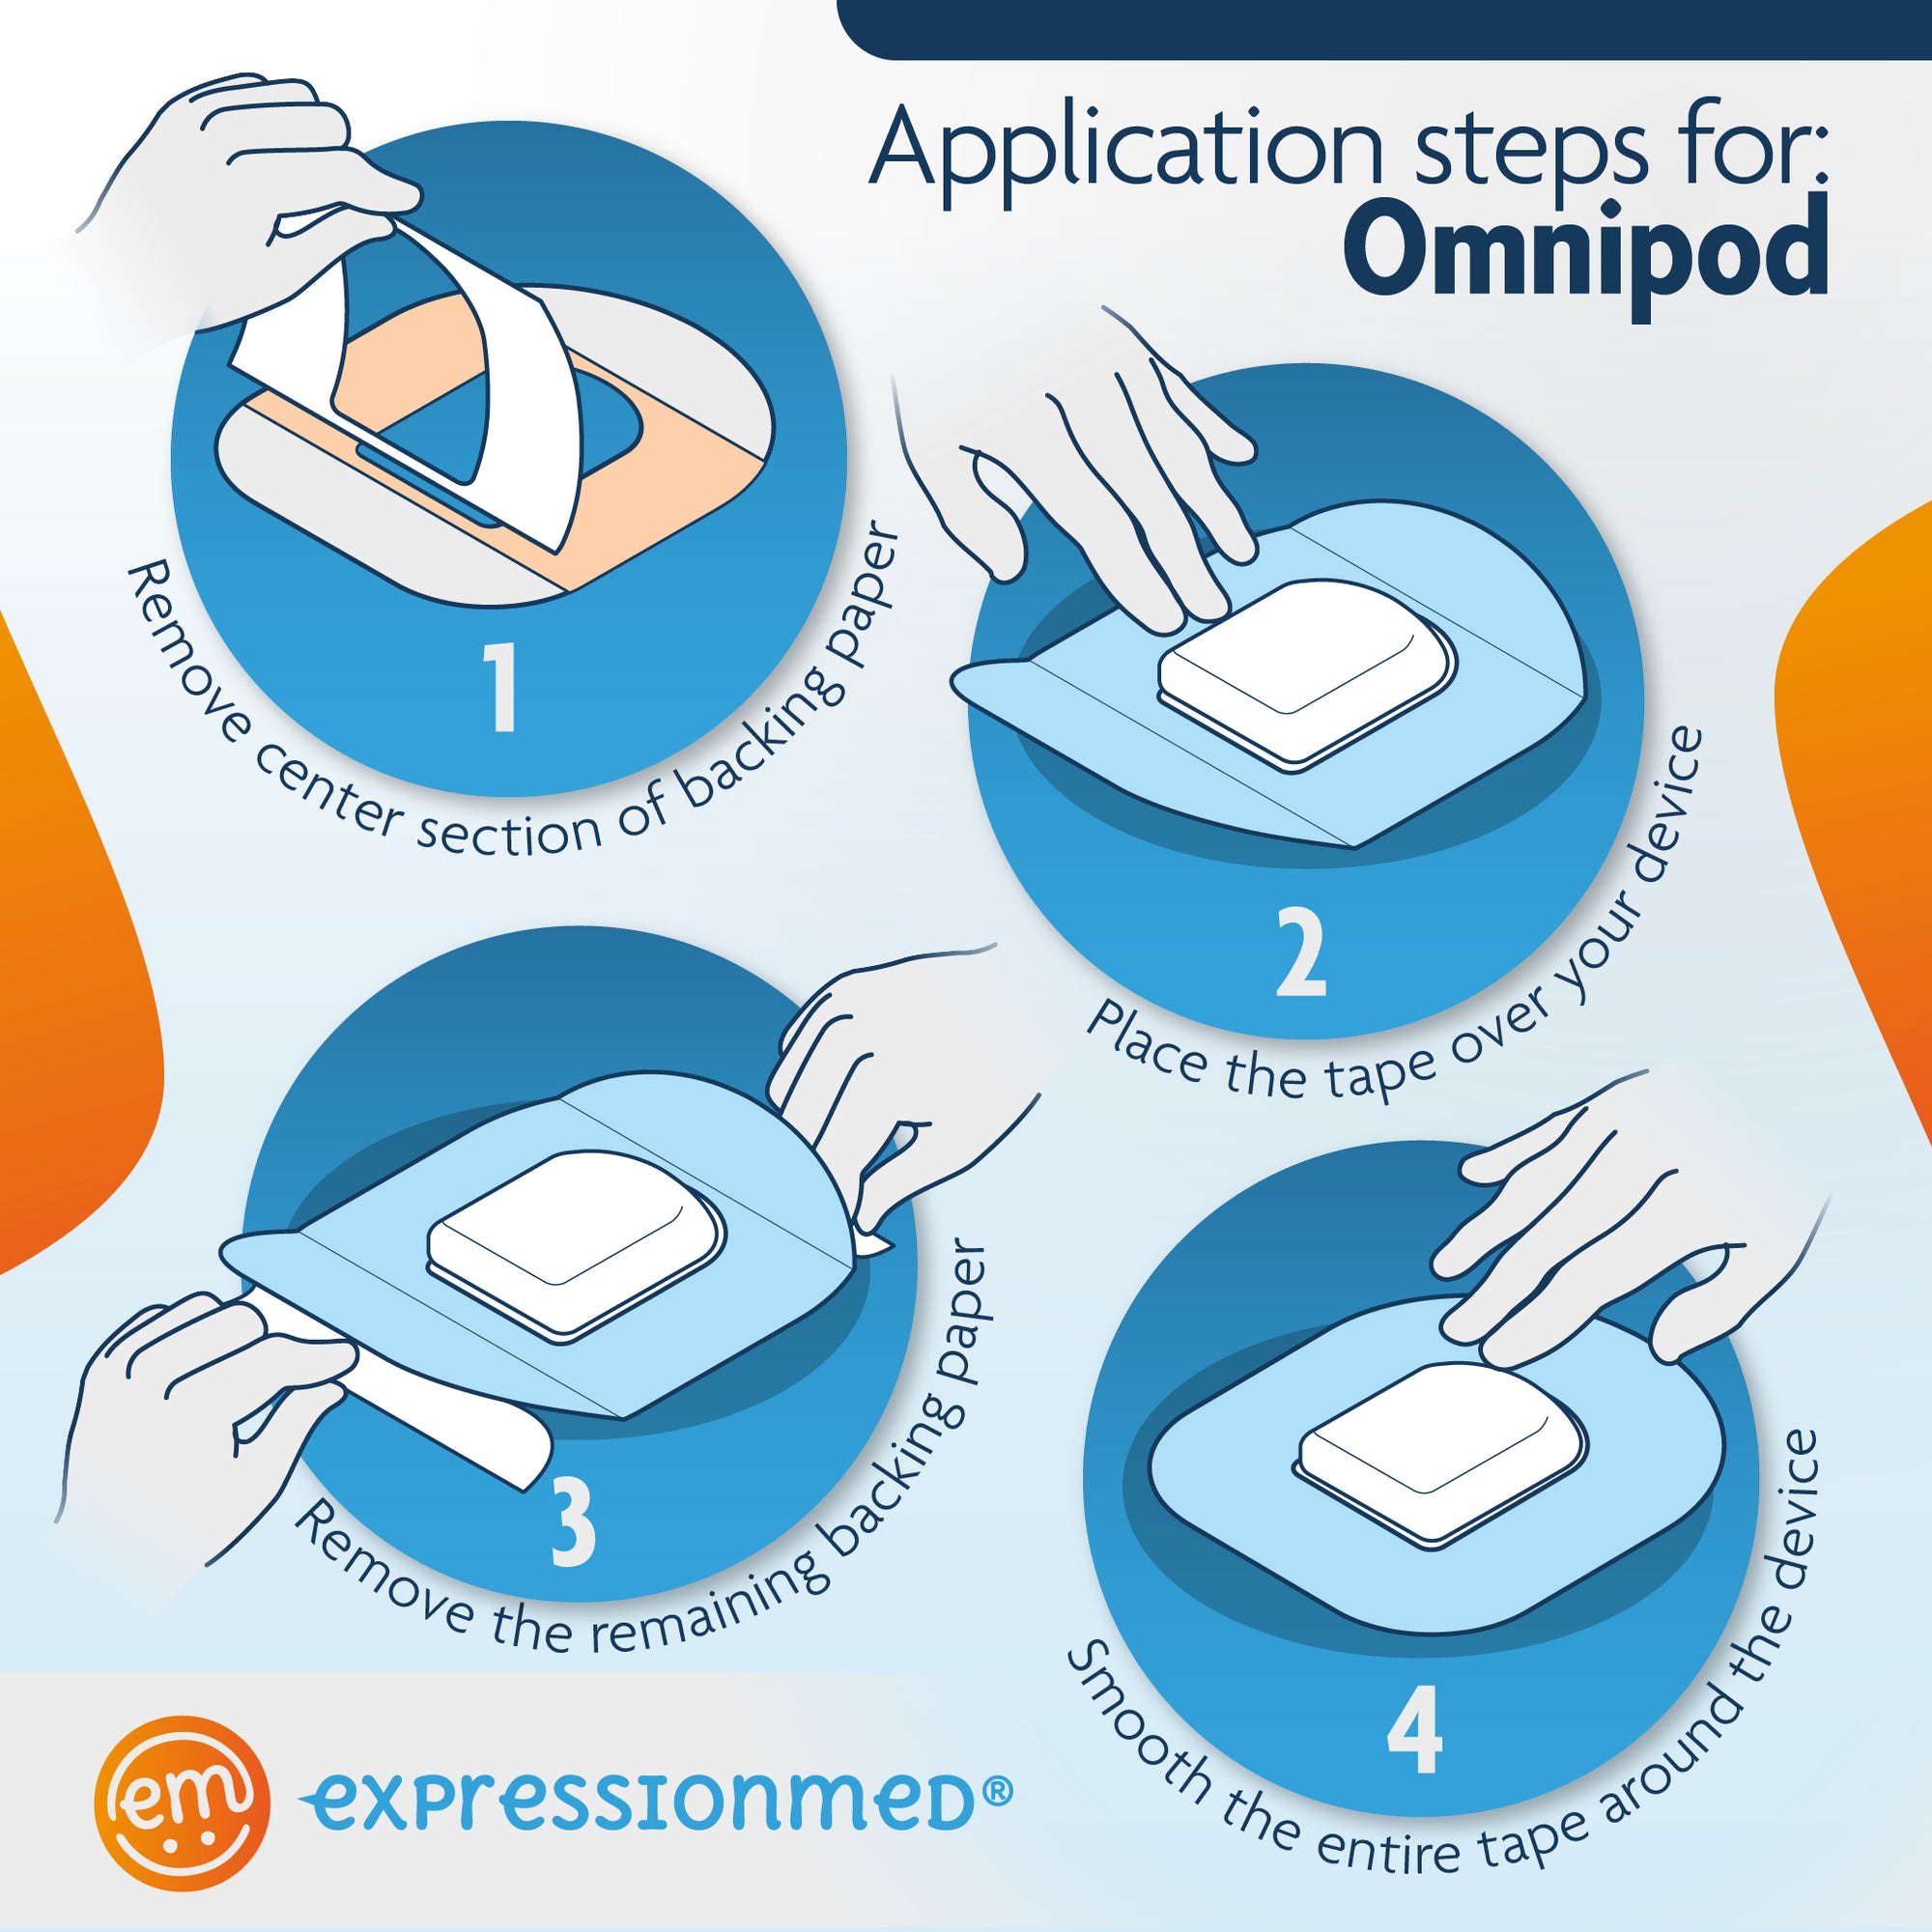 Application Instructions. 1. Prep skin with soap and water. 2. Remove Middle Section and lay center hole over device. 3. Peel off both end sections and smooth down on skin. To remove, hold an edge and strech material off skin.